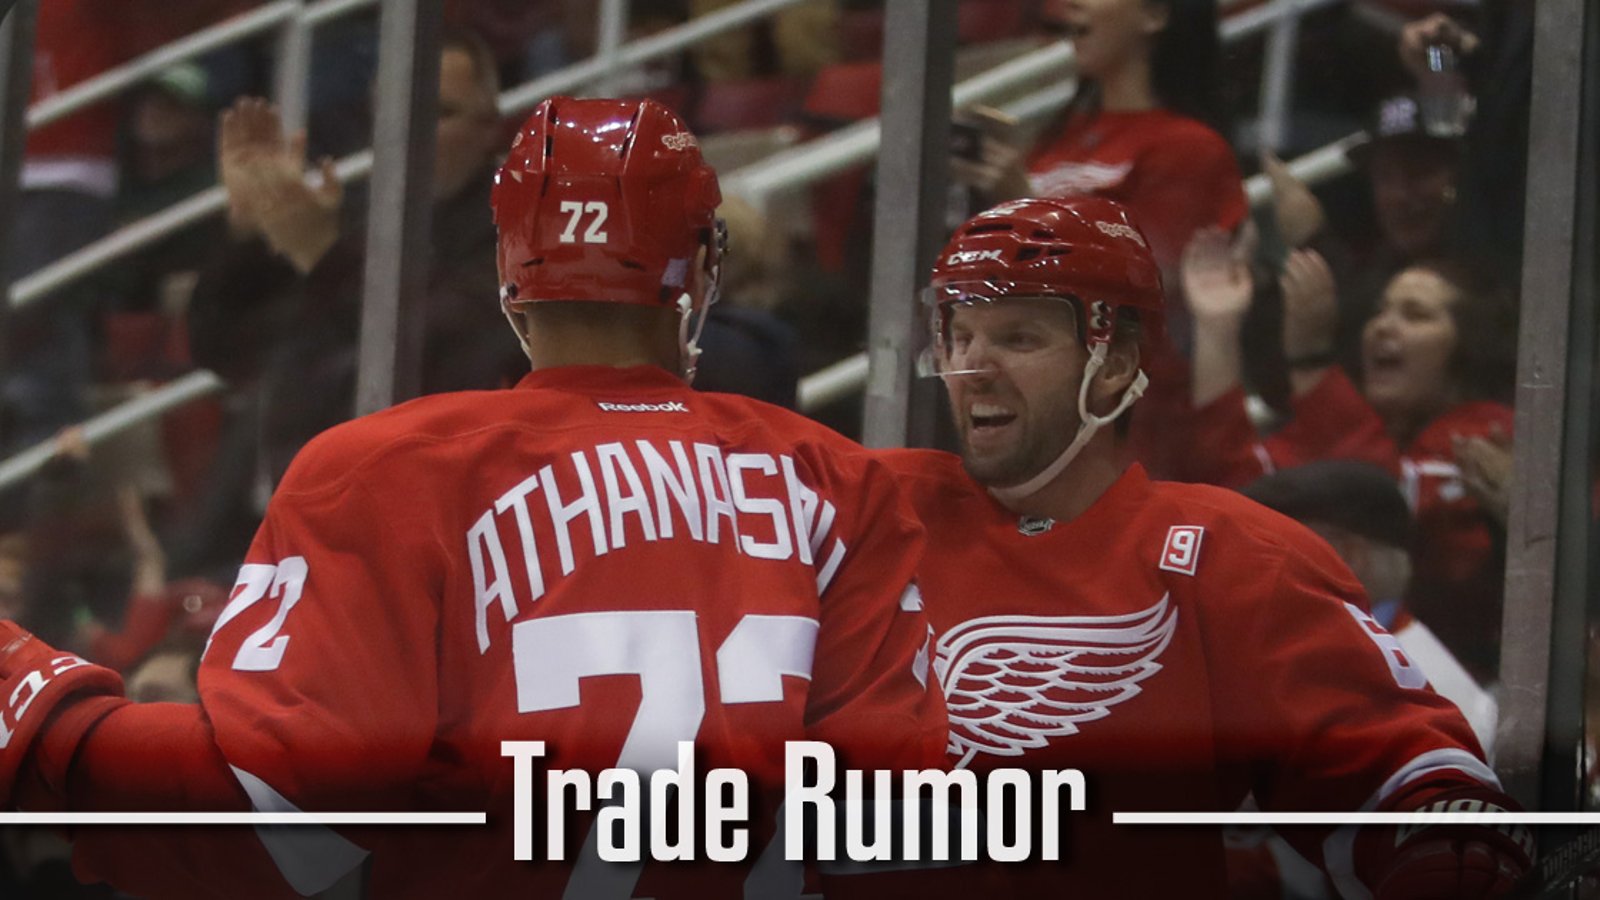 Trade Rumor : Here's what we know so far regarding the Wings.